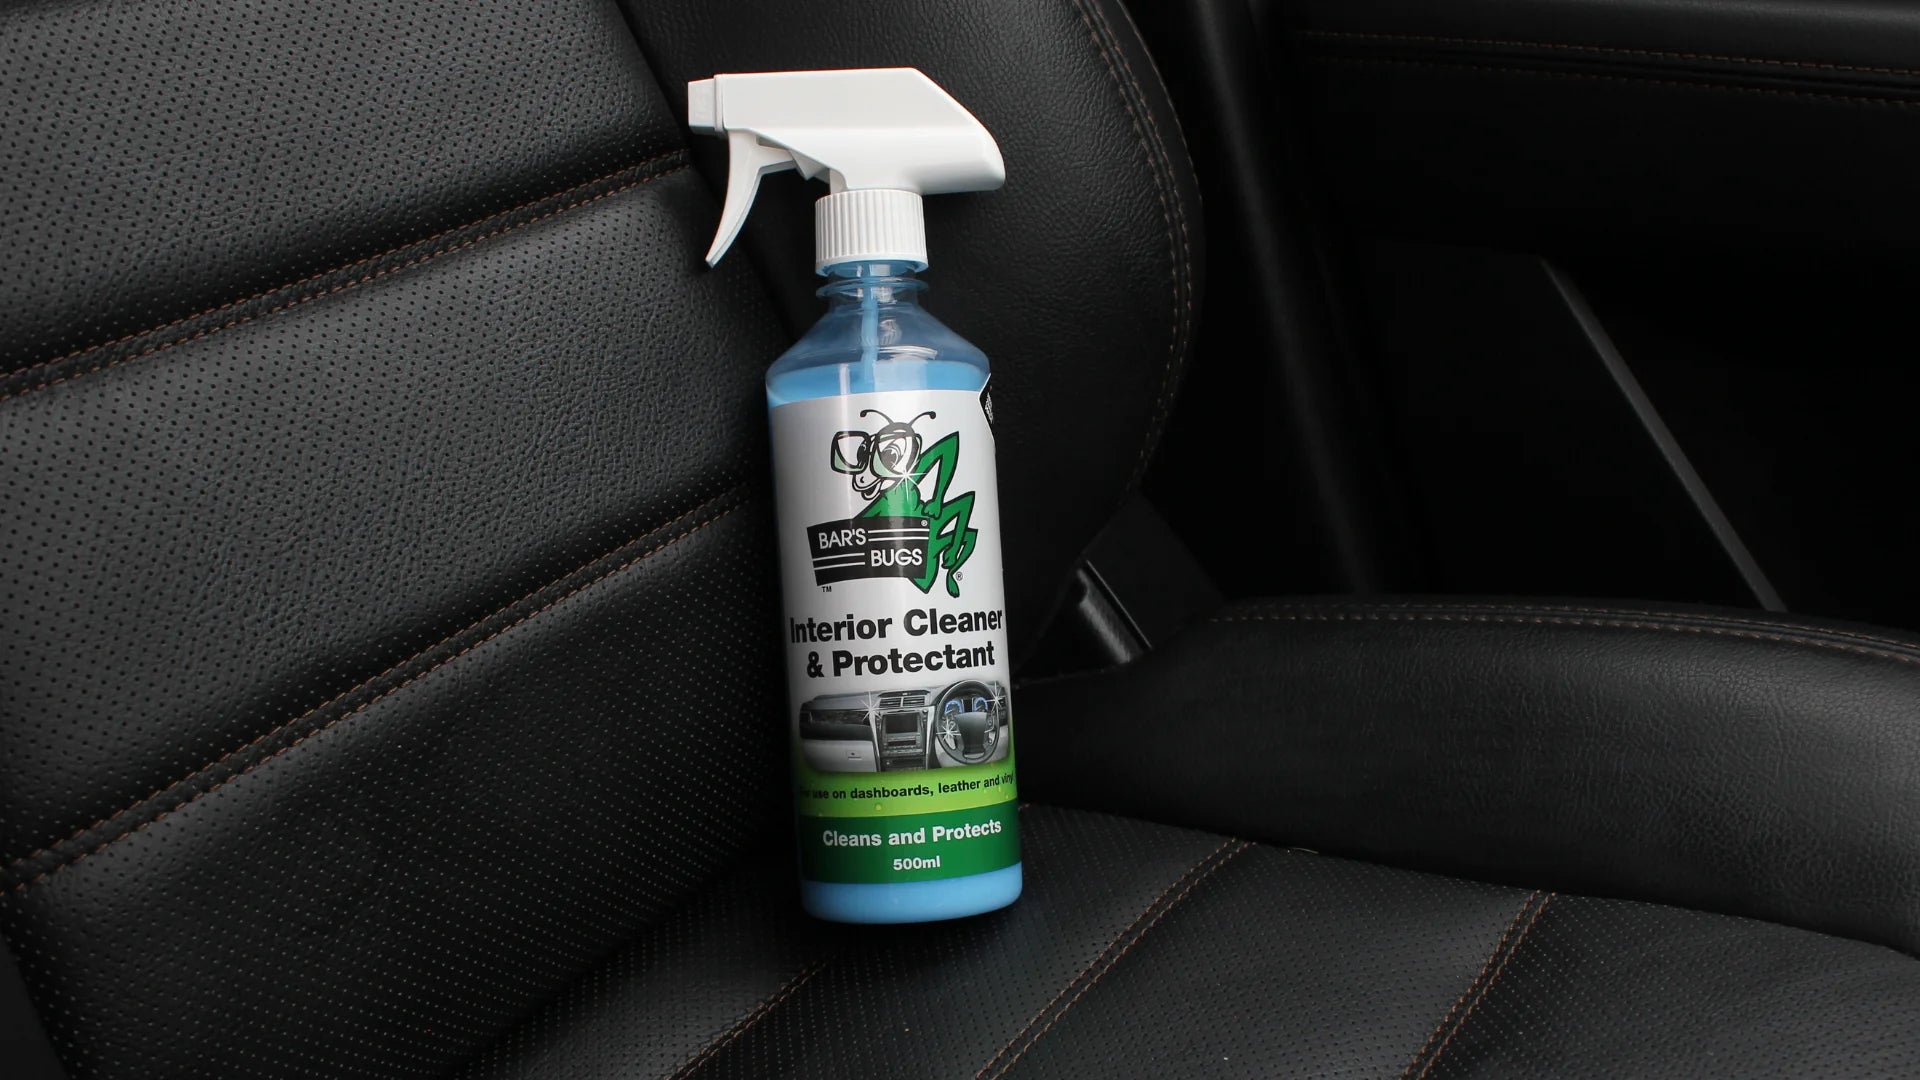 Bar's Bugs Interior Cleaner & Protectant used on leather